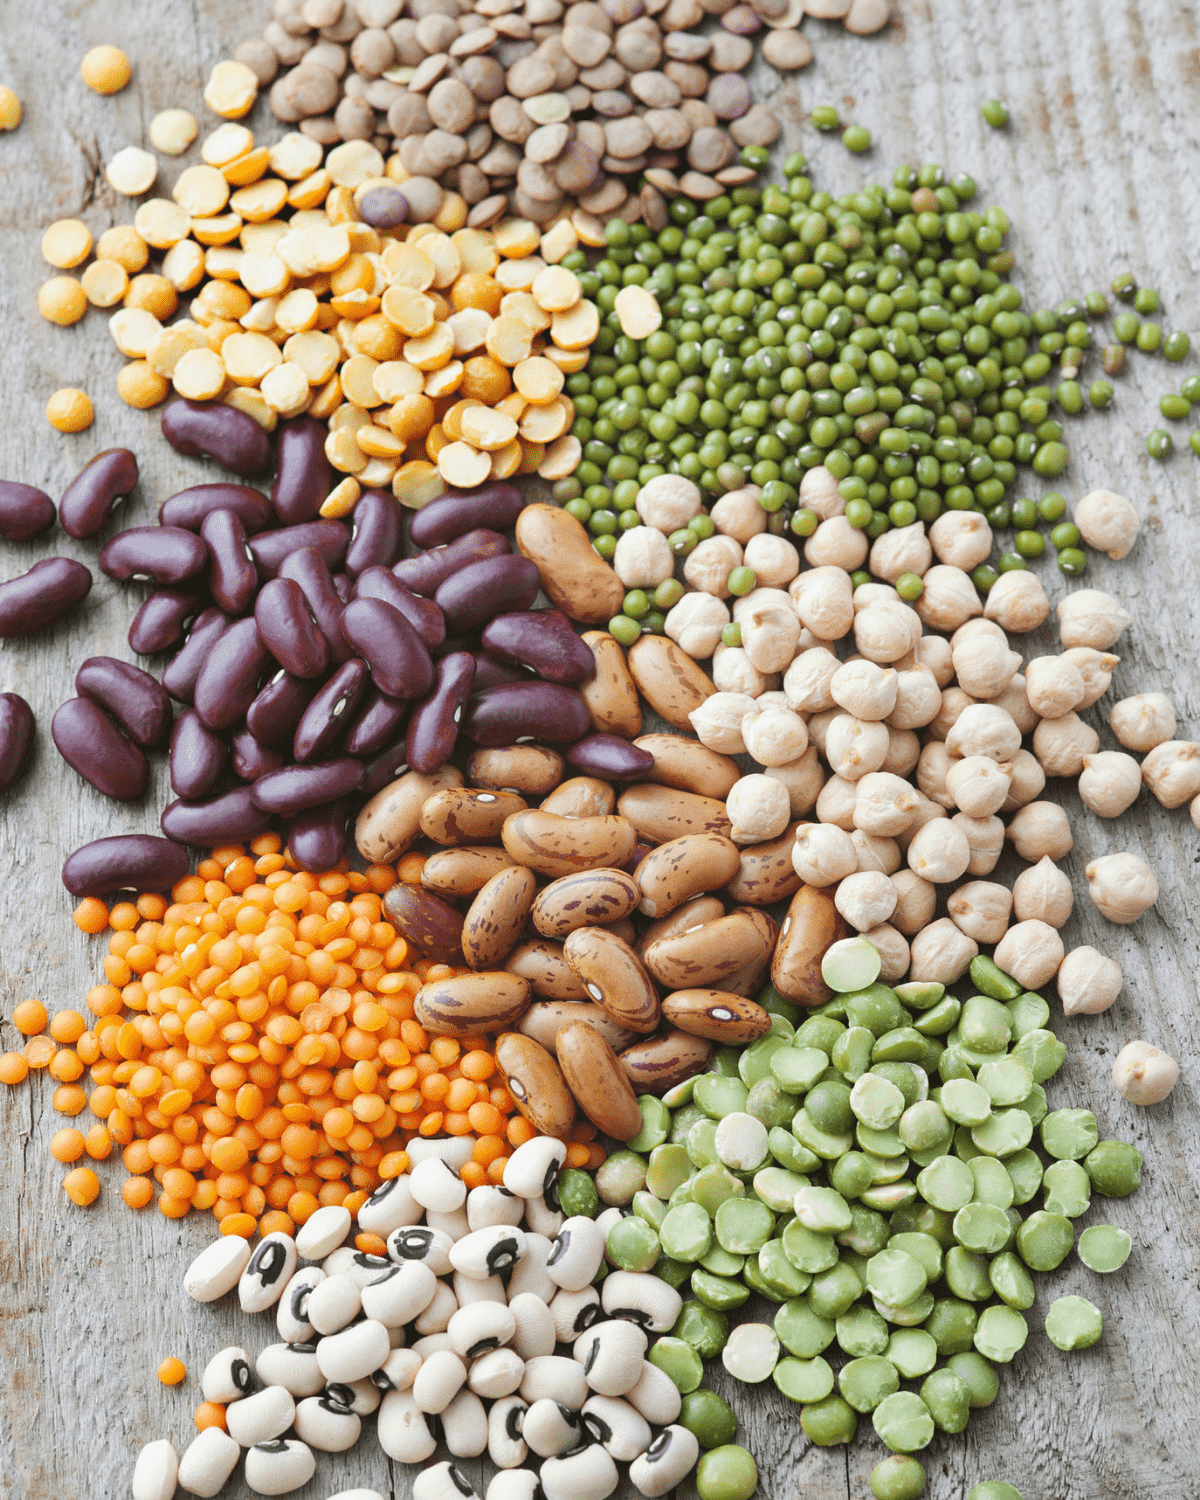 A mixture of several different kinds of dried beans on a wooden surface.